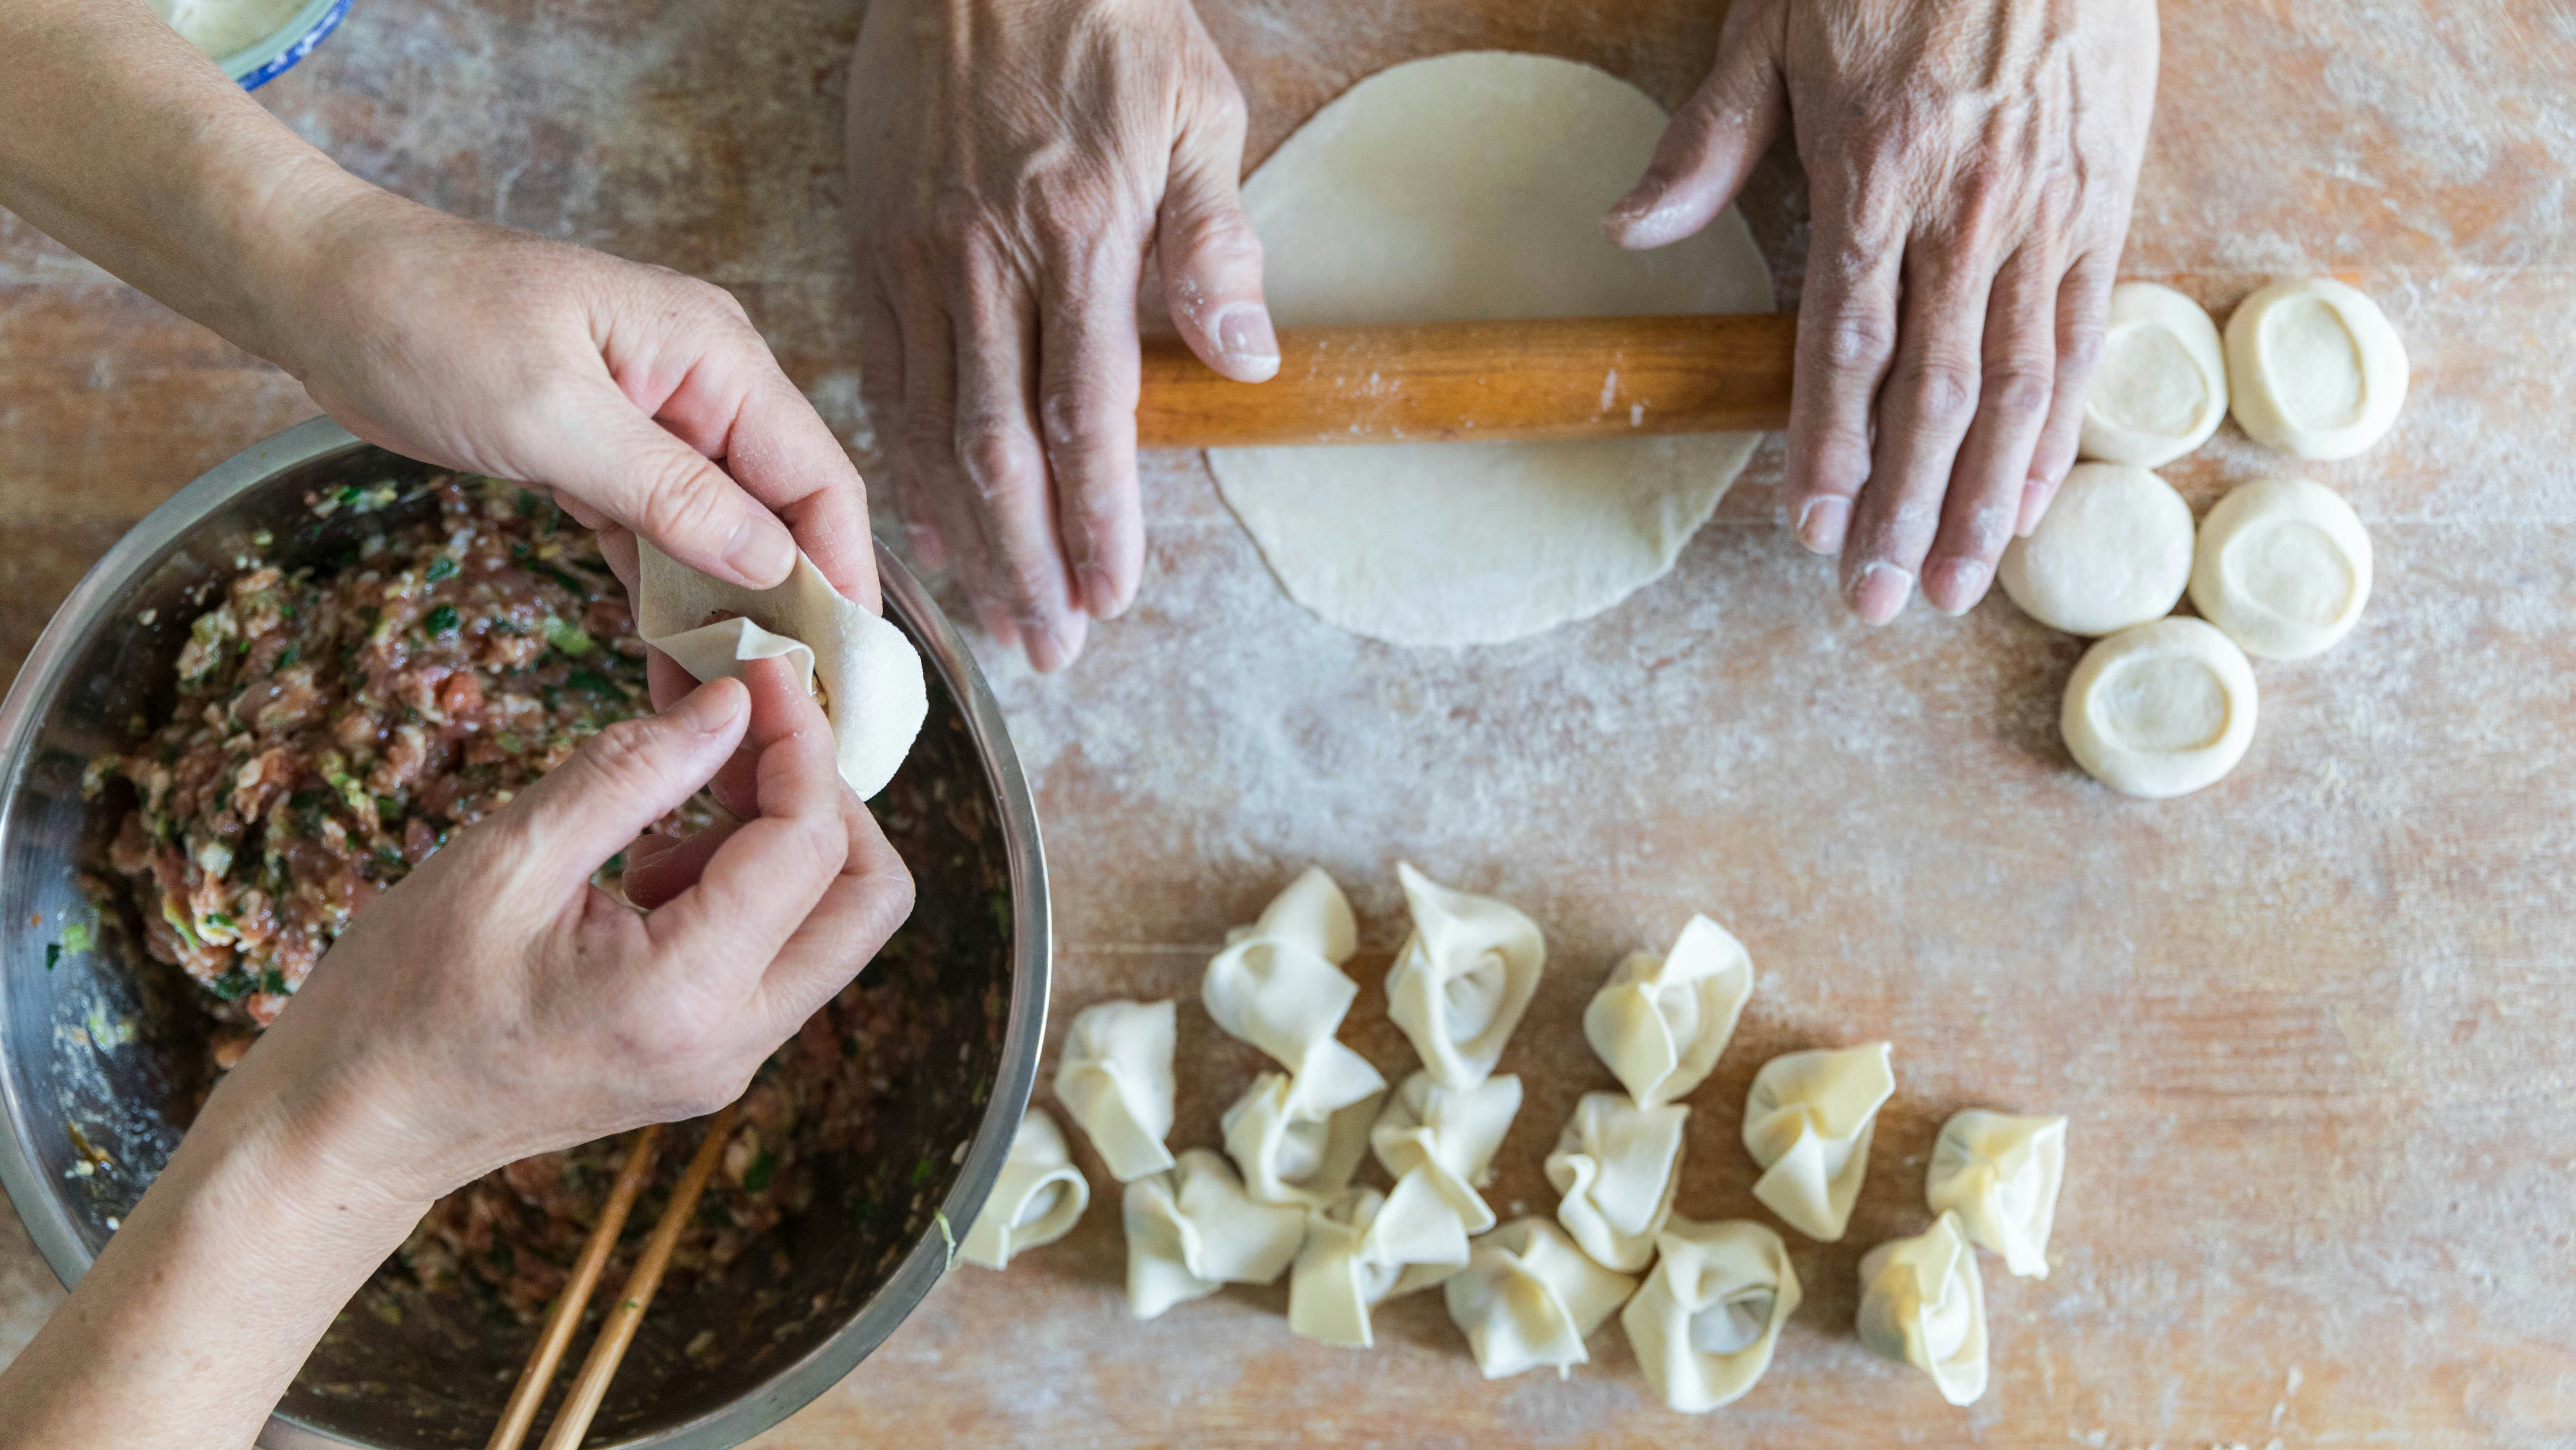 Two pairs of hands roll out and shape dumplings in a home kitchen.